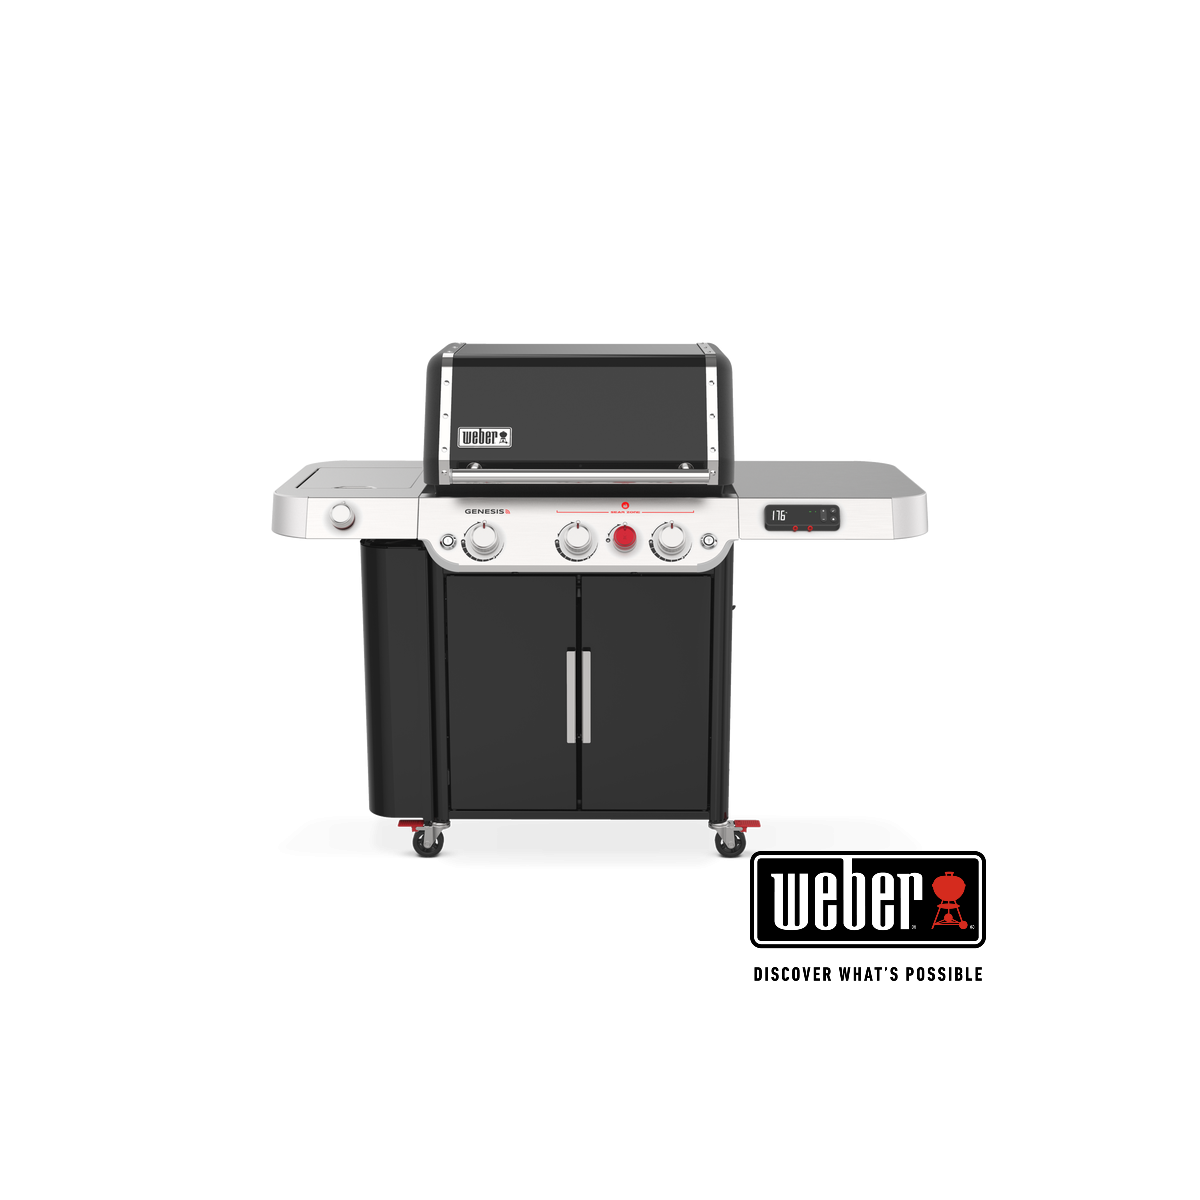 WEBER Genesis EPX-335 gas grill, 35810069